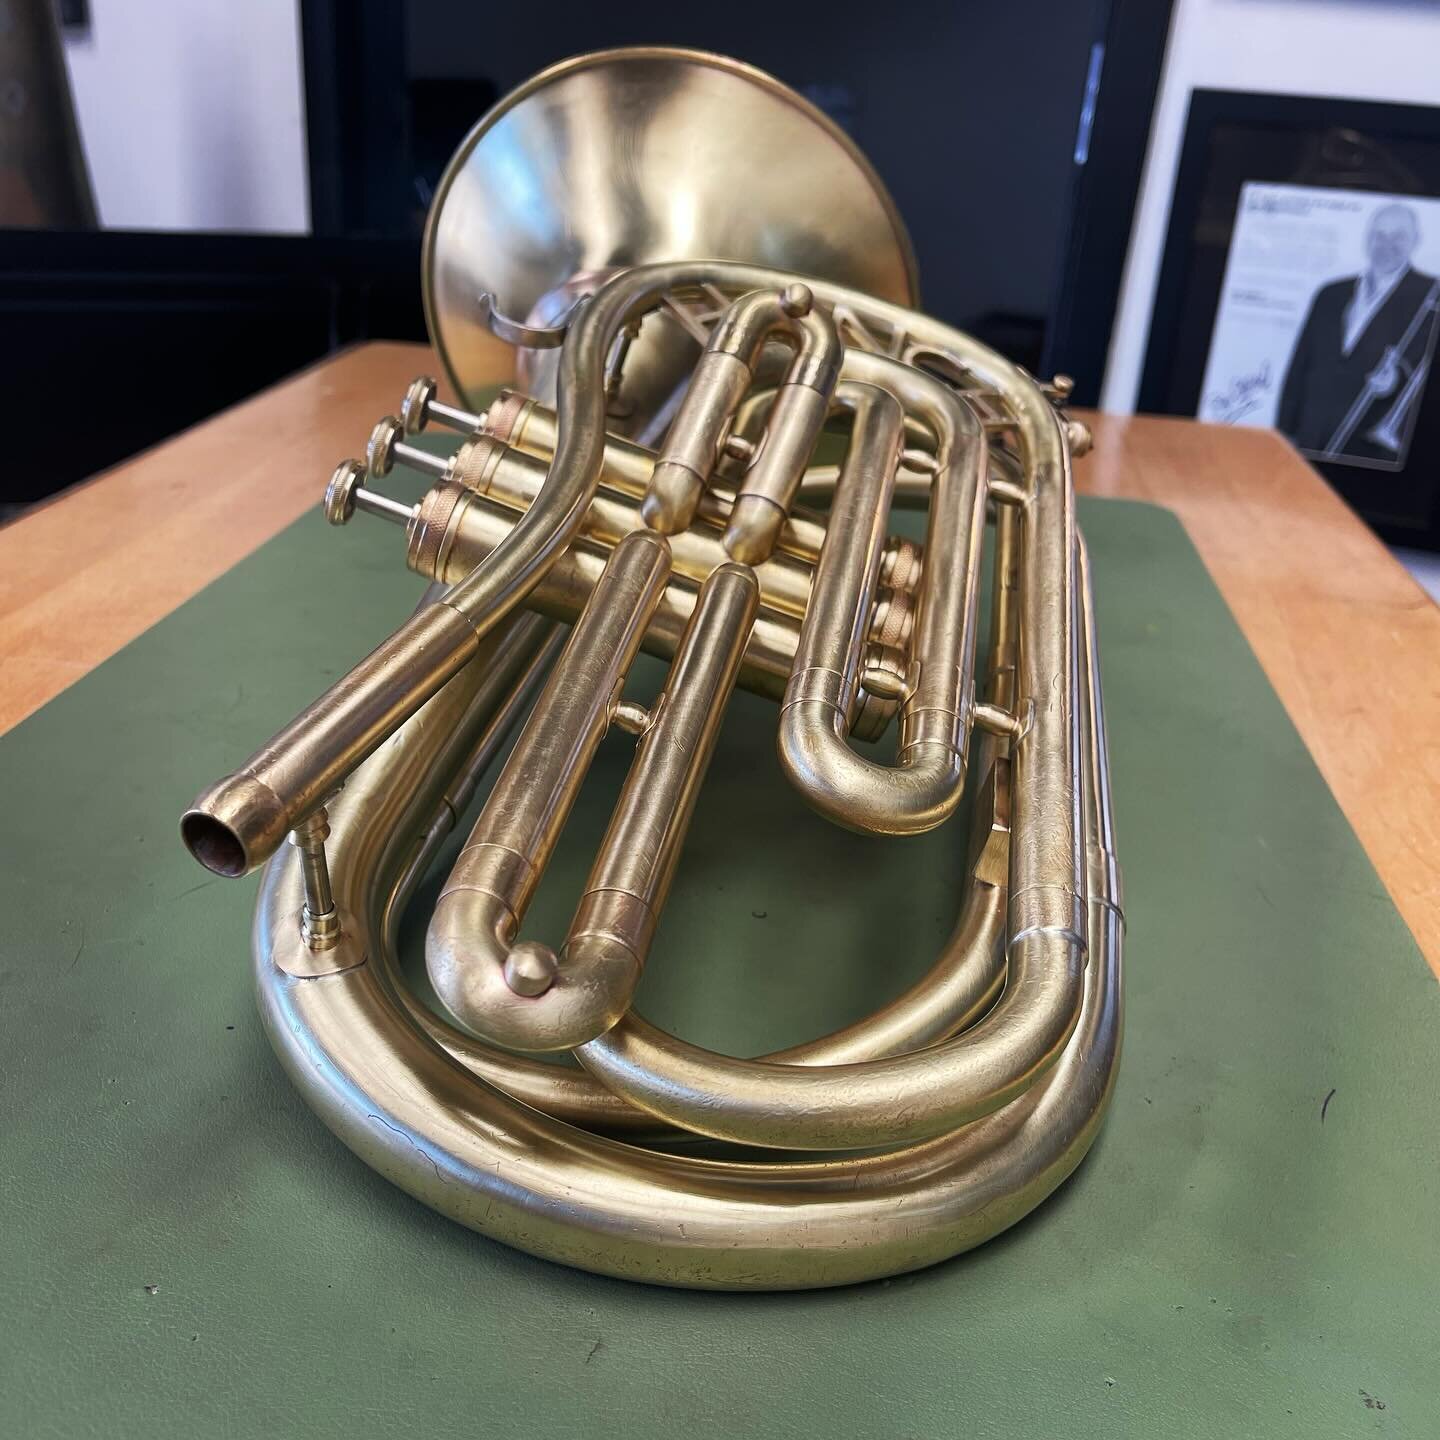 &ldquo;WTF????!!! This is amazing&hellip; Your attention to detail is incredible. It plays great&rdquo; Thanks @hincheymusic - enjoy it!! 

#SweeneyBrass
#strip 
#quality
#shopcat
#custom
#patina
#trombone 
#basstrombone 
#doneright 
#modification
#r